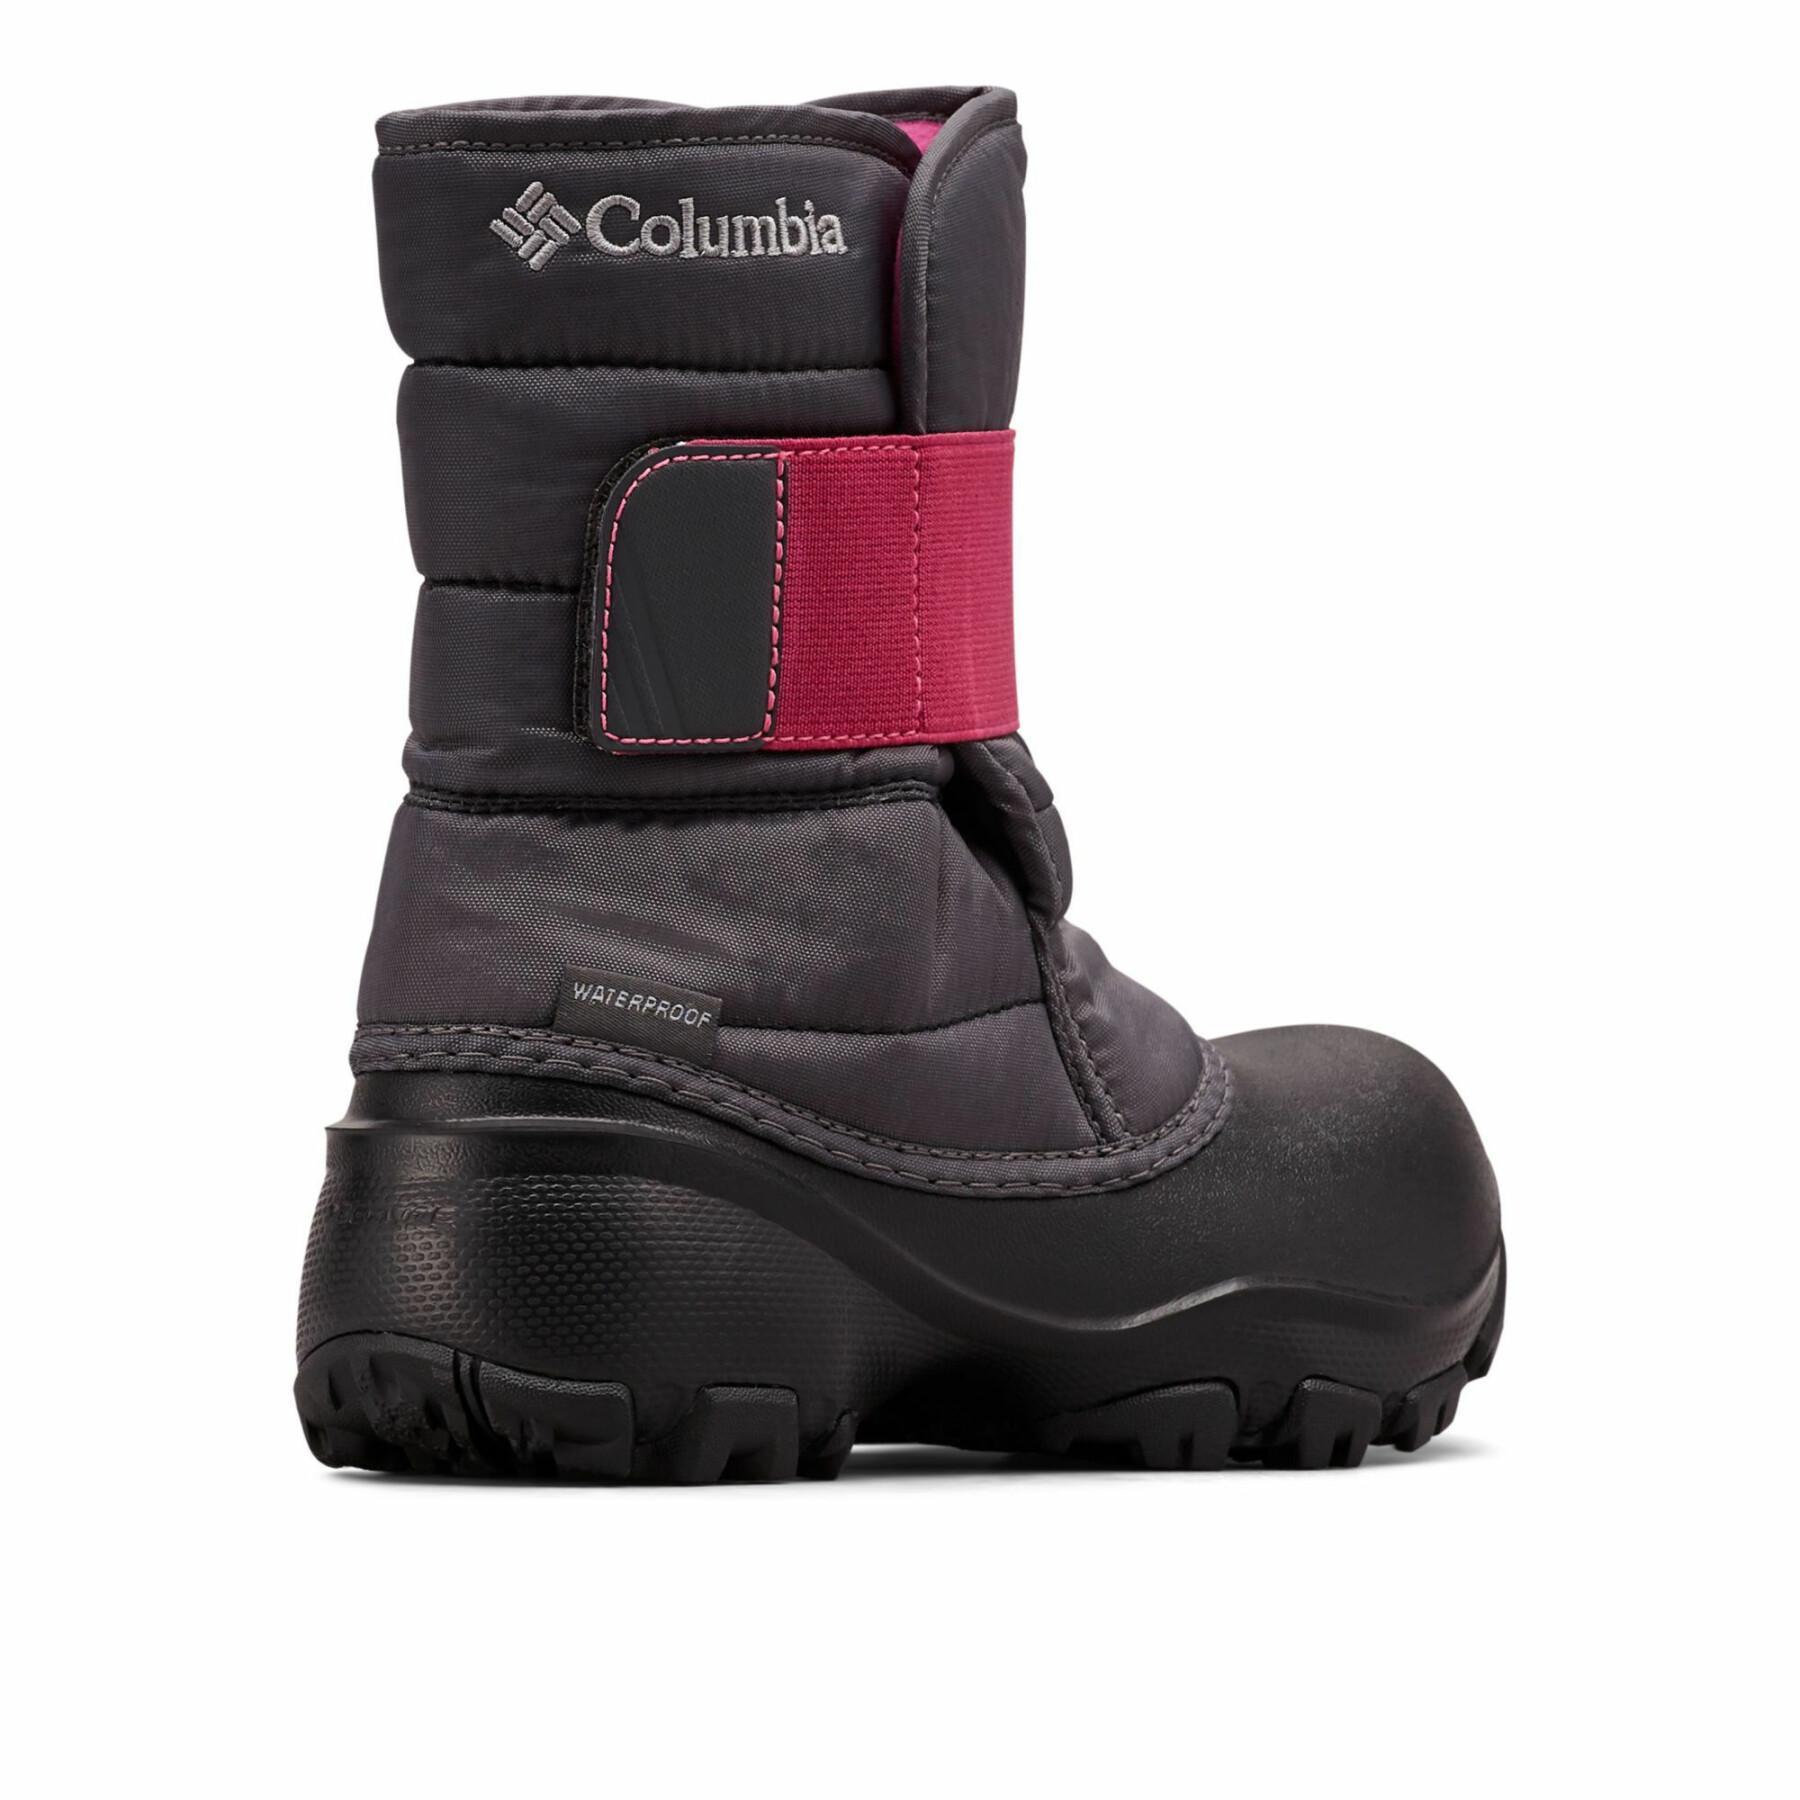 Chaussures enfant Columbia Botte Rope Tow Kruser 2